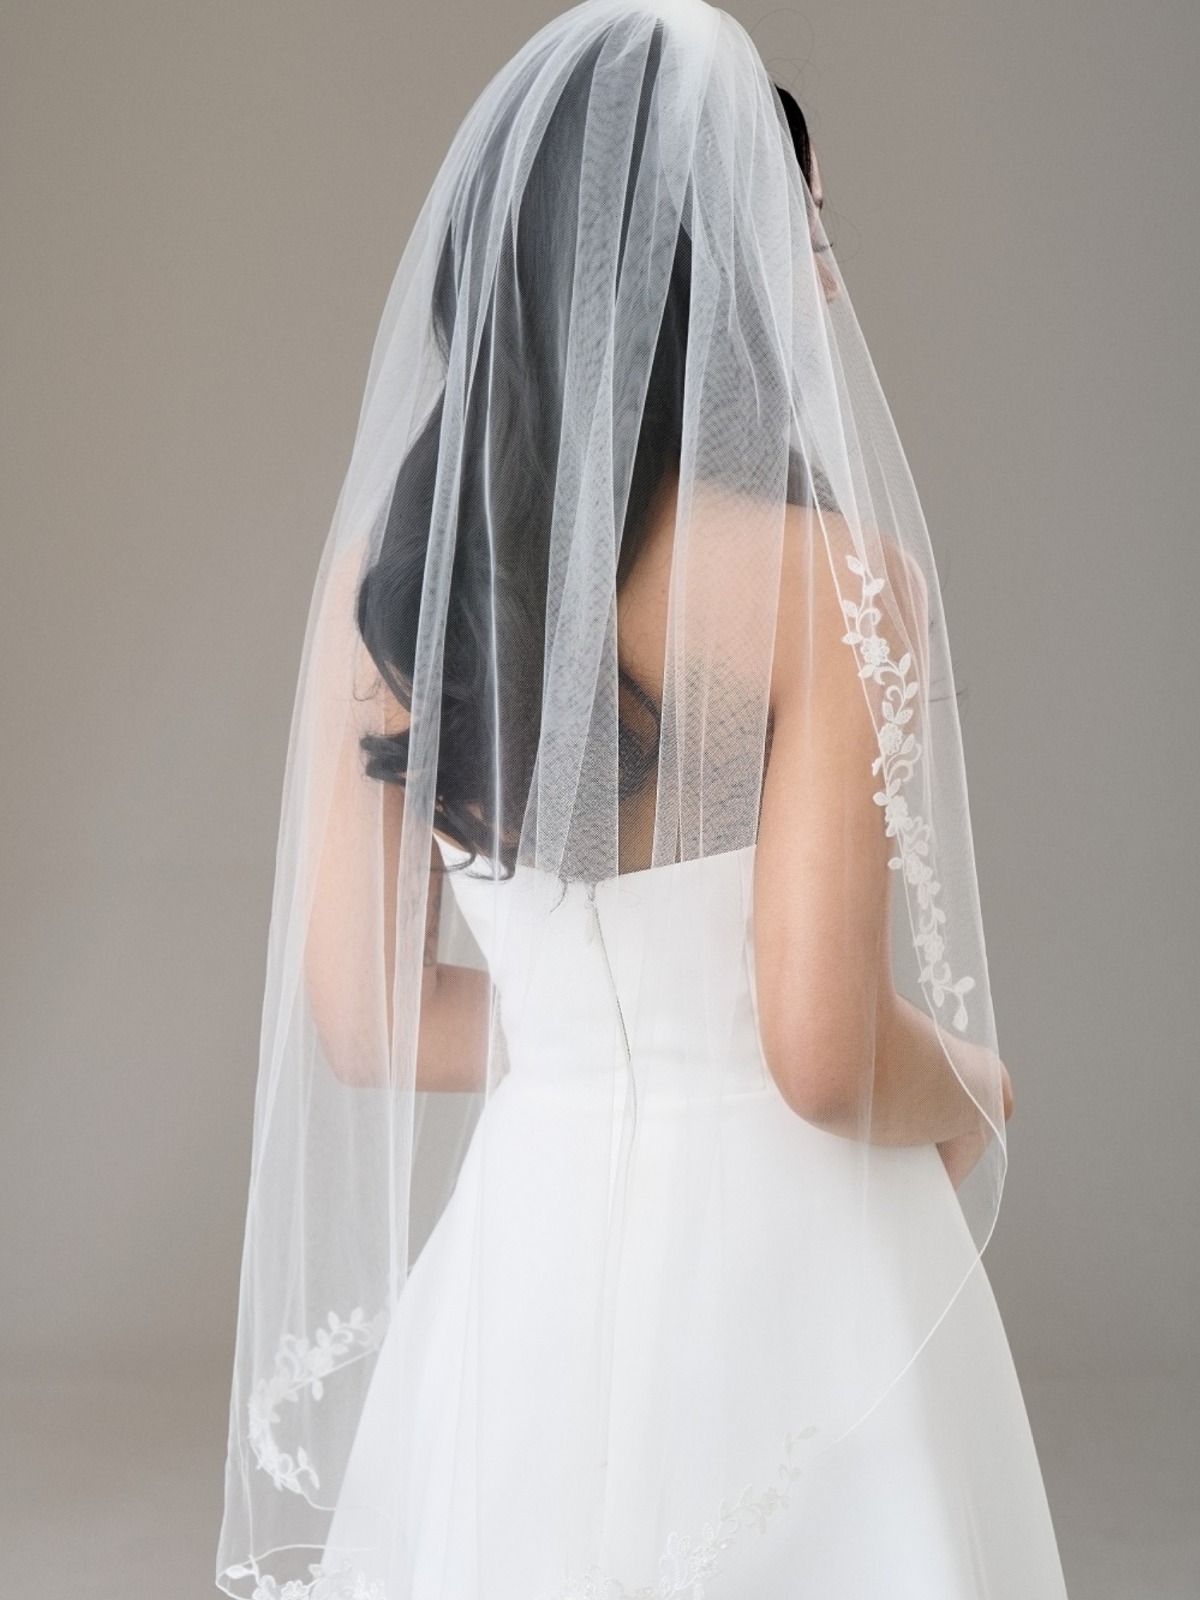  Montrose Ivory Single Tier Corded Edge Veil with Floral Lace Motif